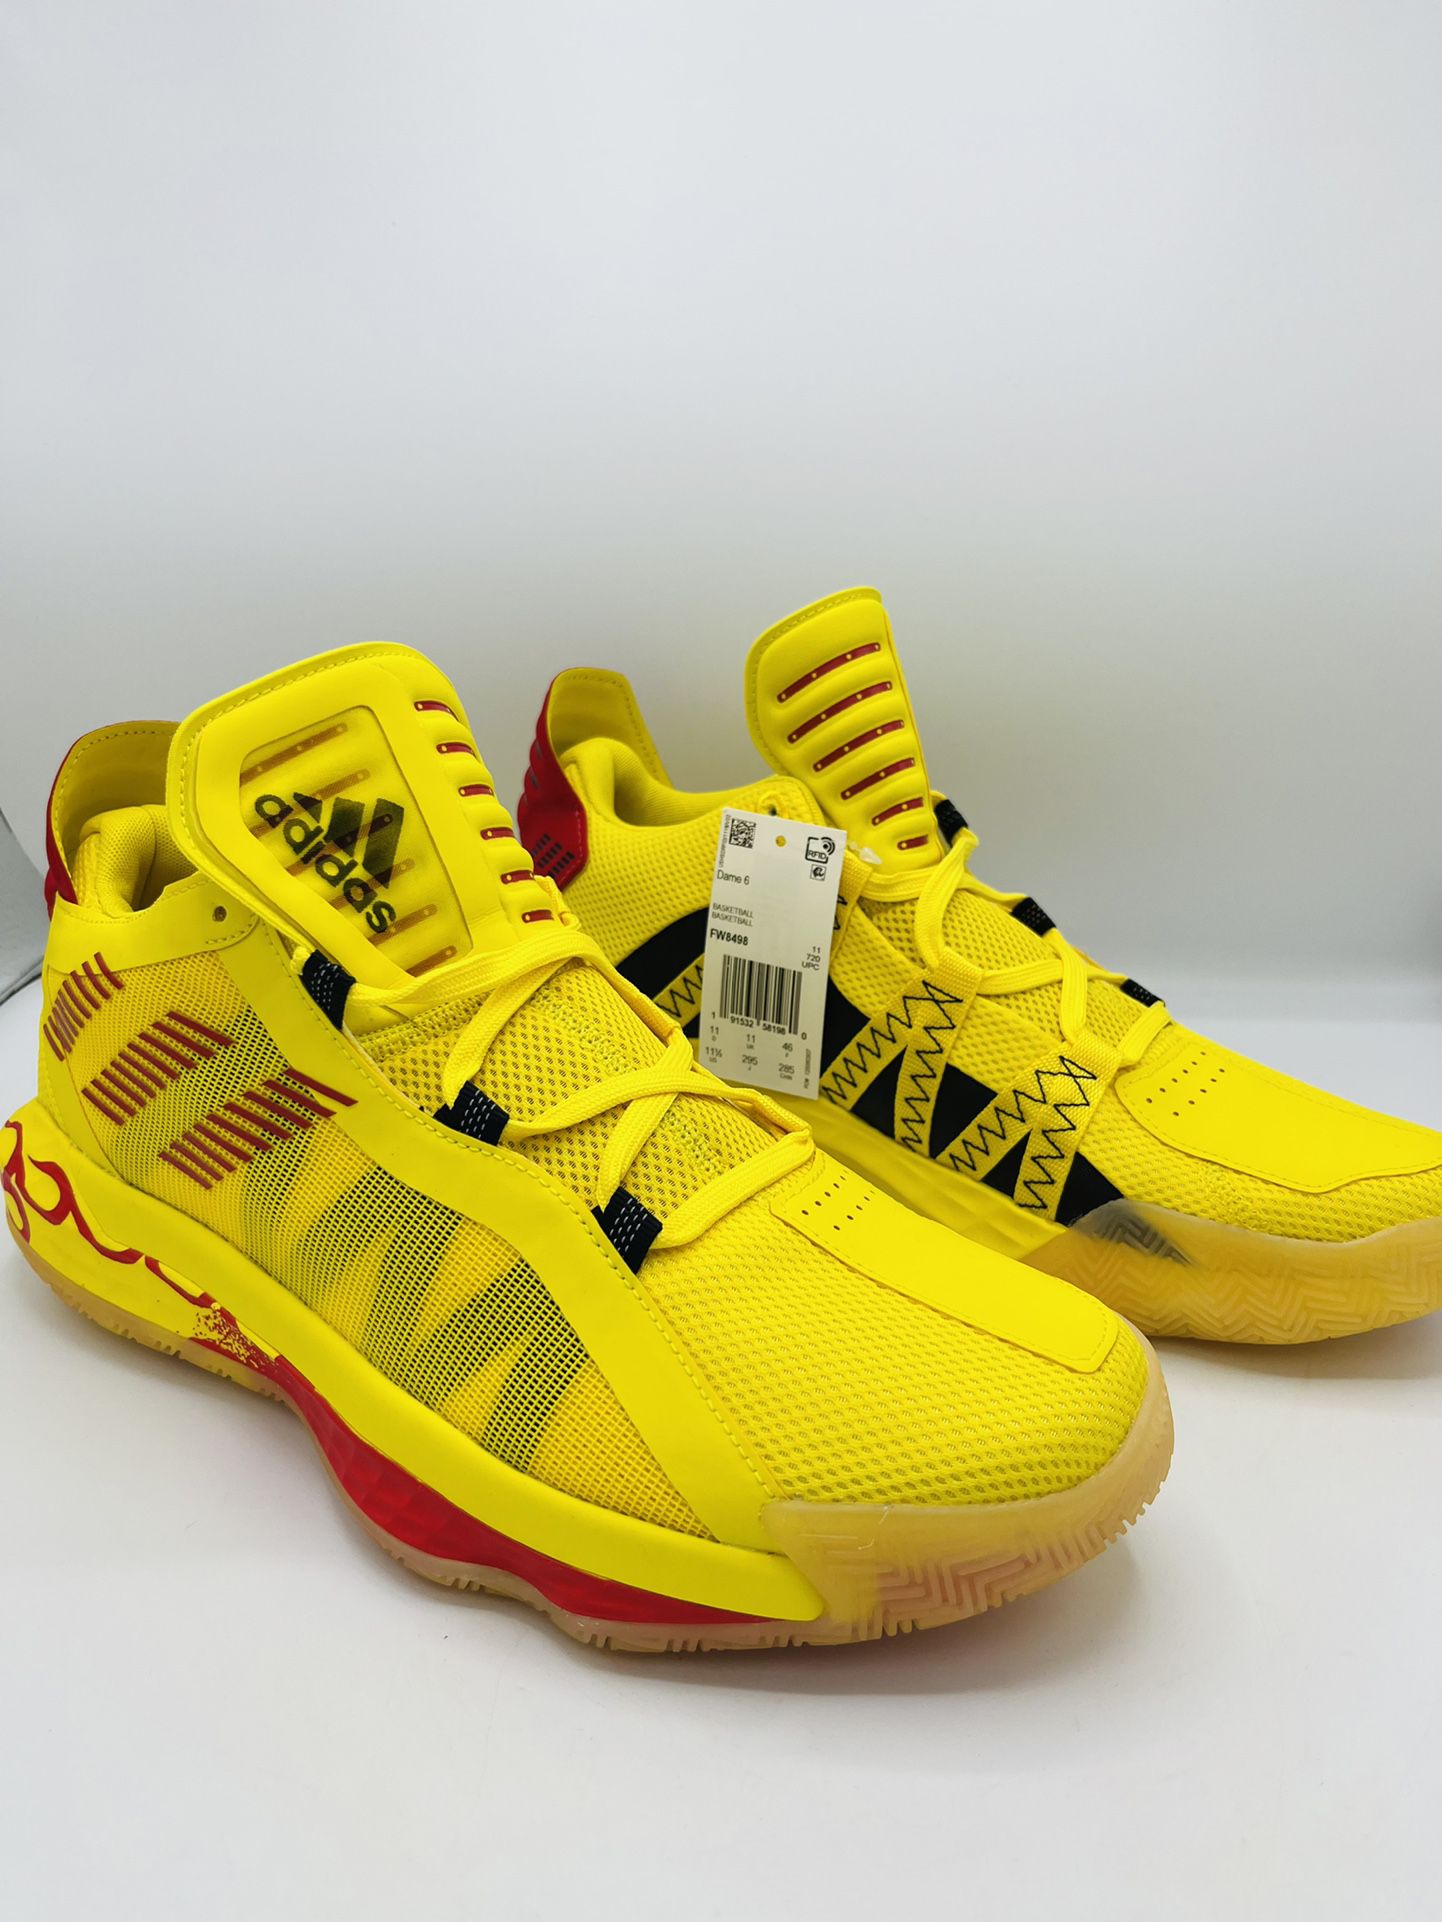 Adidas Dame 6 Hot Rod Basketball FW8498 Shoes size 11.5 for Sale in Bakersfield, CA OfferUp